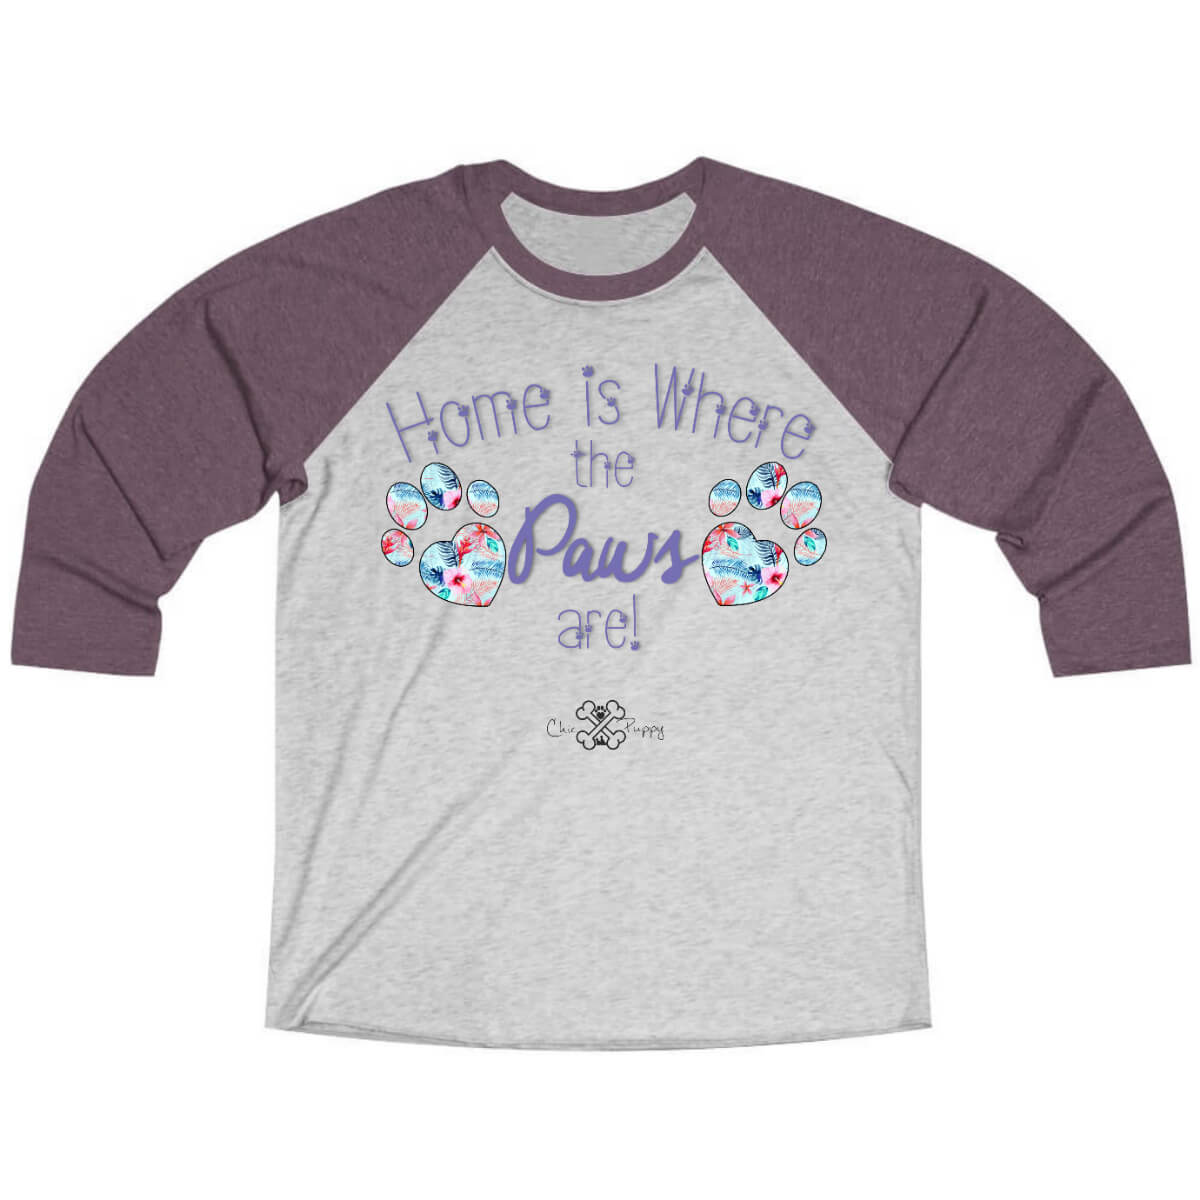 Matching Dog and Owner - Home is Where the Paws Are! - Women Raglans - Women